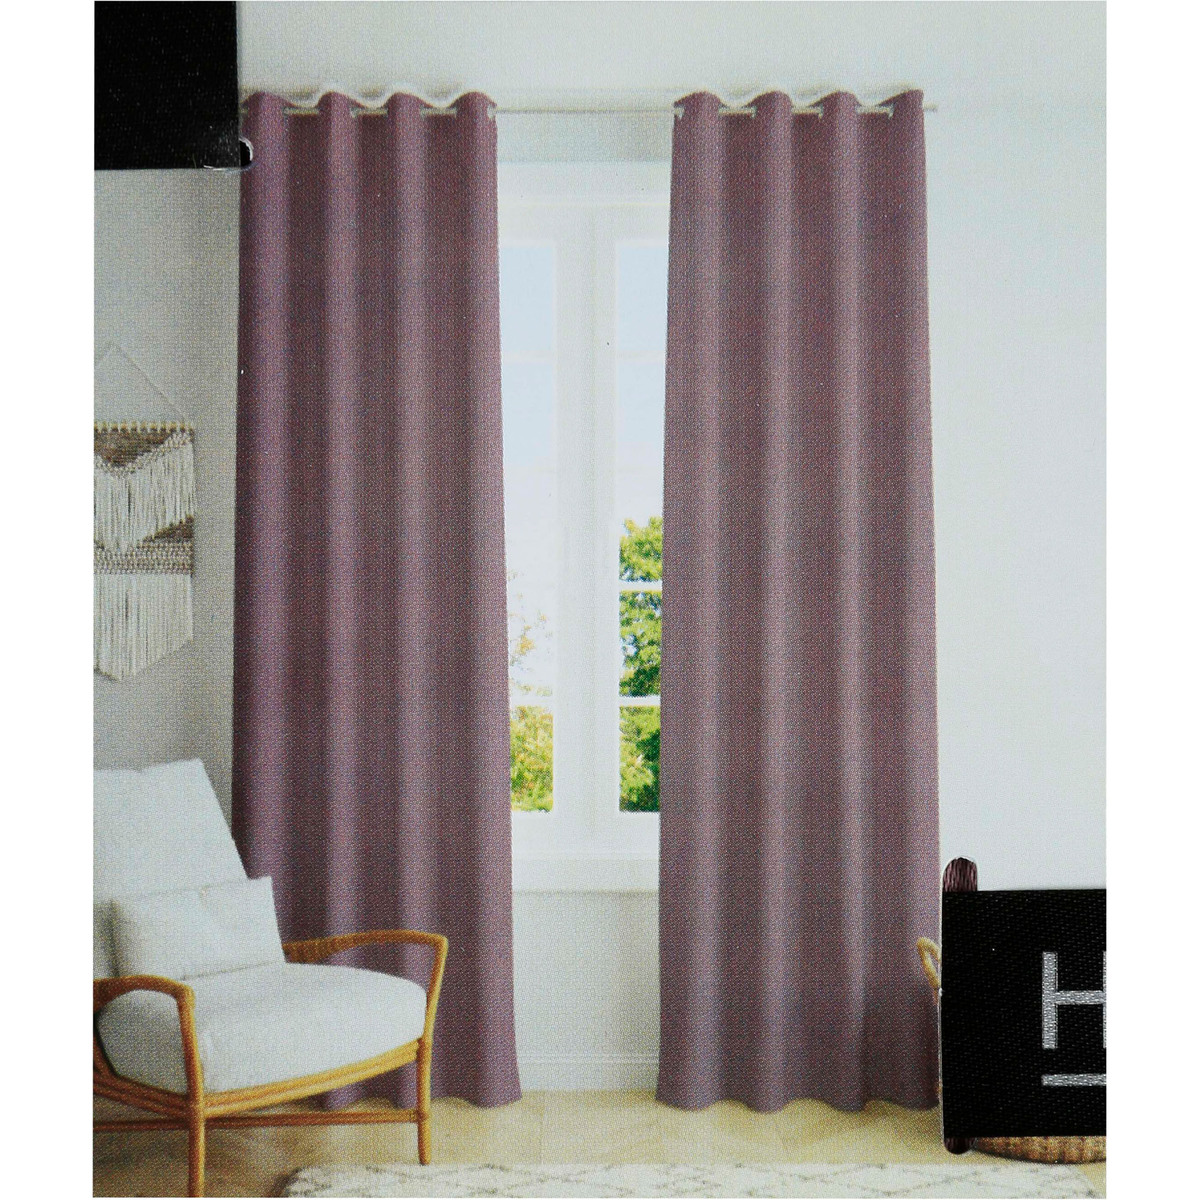 Homewell Window Curtain Black Out 135x260cm Assorted Per pc